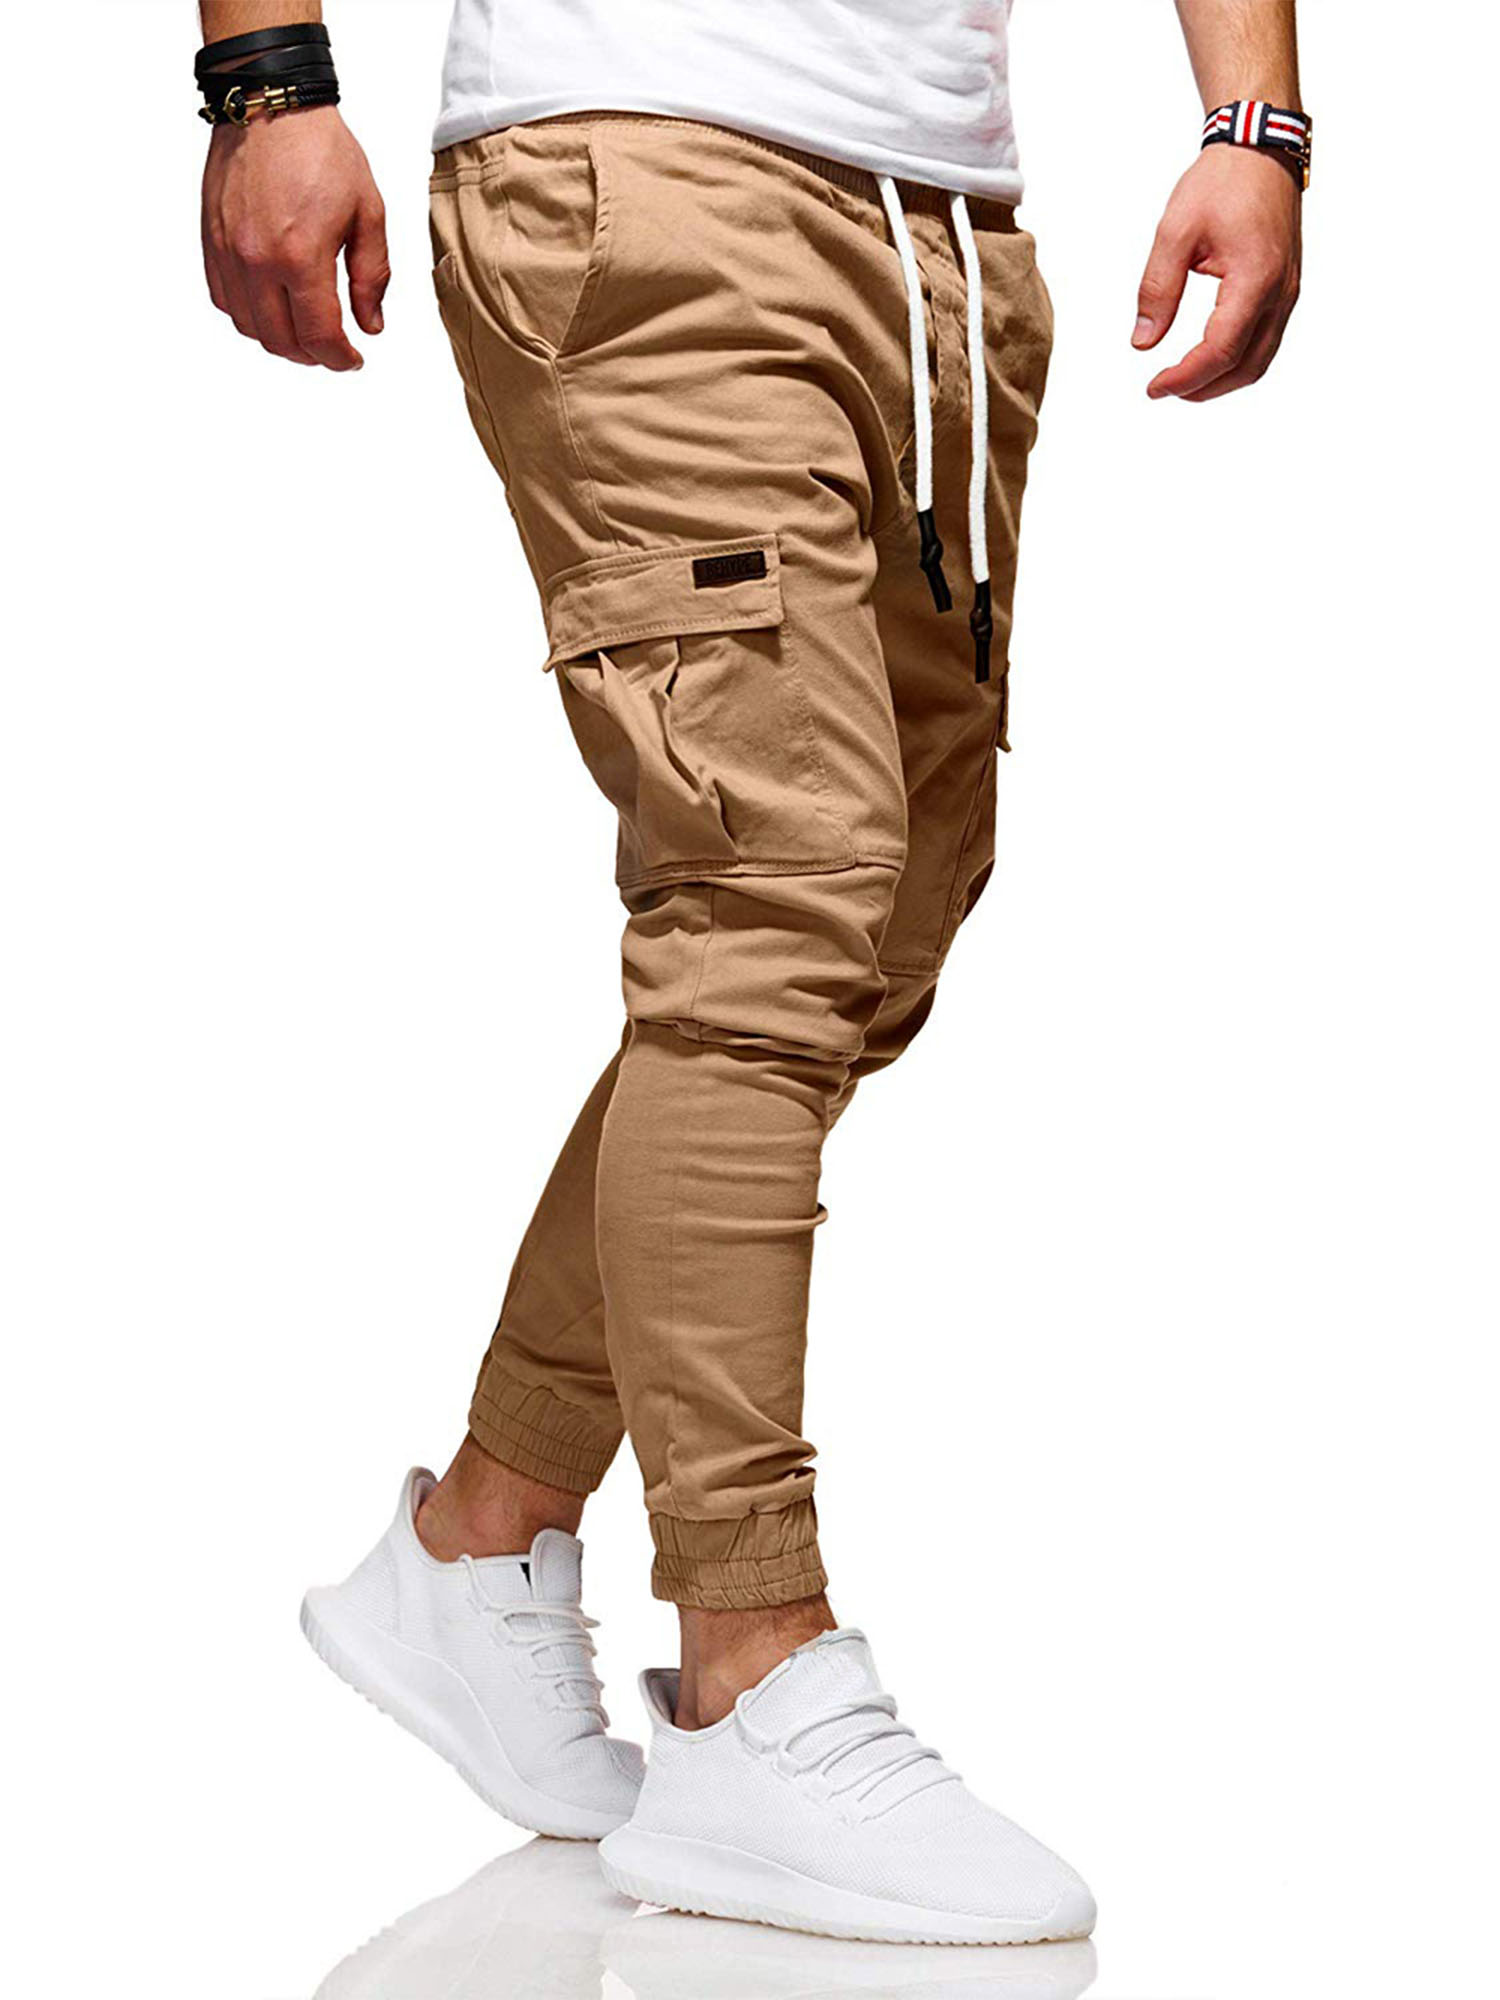 Mens Fashion Loose Sweatpants Elastic Waist Jogging Sports Pant Fitness Solid Color Casual Cargo Trousers